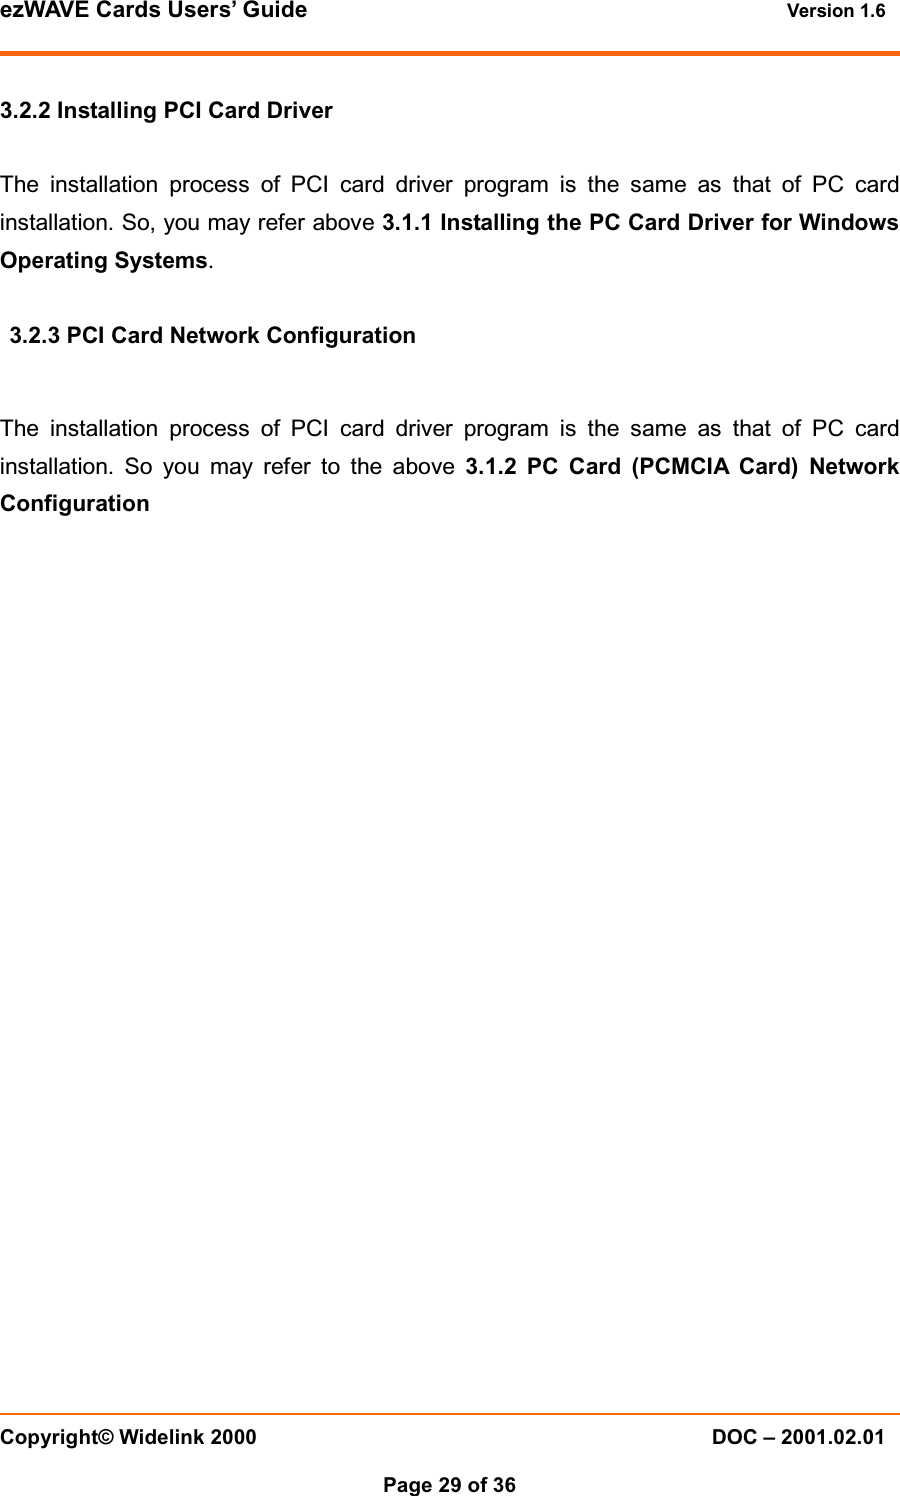 ezWAVE Cards Users’ Guide Version 1.6 Copyright© Widelink 2000 DOC – 2001.02.01Page 29 of 36 3.2.2 Installing PCI Card DriverThe installation process of PCI card driver program is the same as that of PC cardinstallation. So, you may refer above 3.1.1 Installing the PC Card Driver for WindowsOperating Systems.3.2.3 PCI Card Network ConfigurationThe installation process of PCI card driver program is the same as that of PC cardinstallation. So you may refer to the above 3.1.2 PC Card (PCMCIA Card) NetworkConfiguration